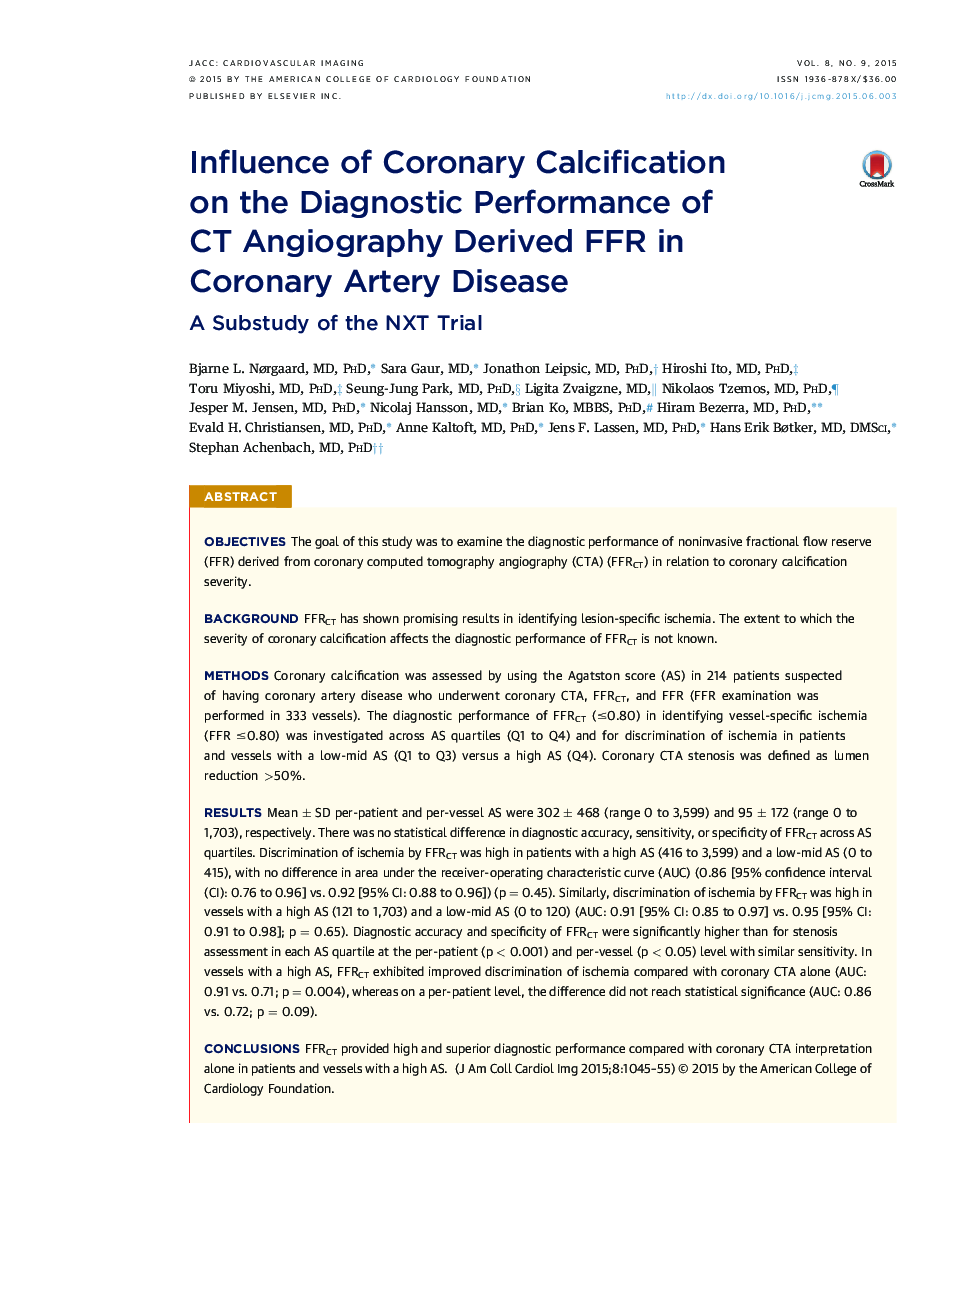 Influence of Coronary Calcification on the Diagnostic Performance of CT Angiography Derived FFR in Coronary Artery Disease : A Substudy of the NXT Trial